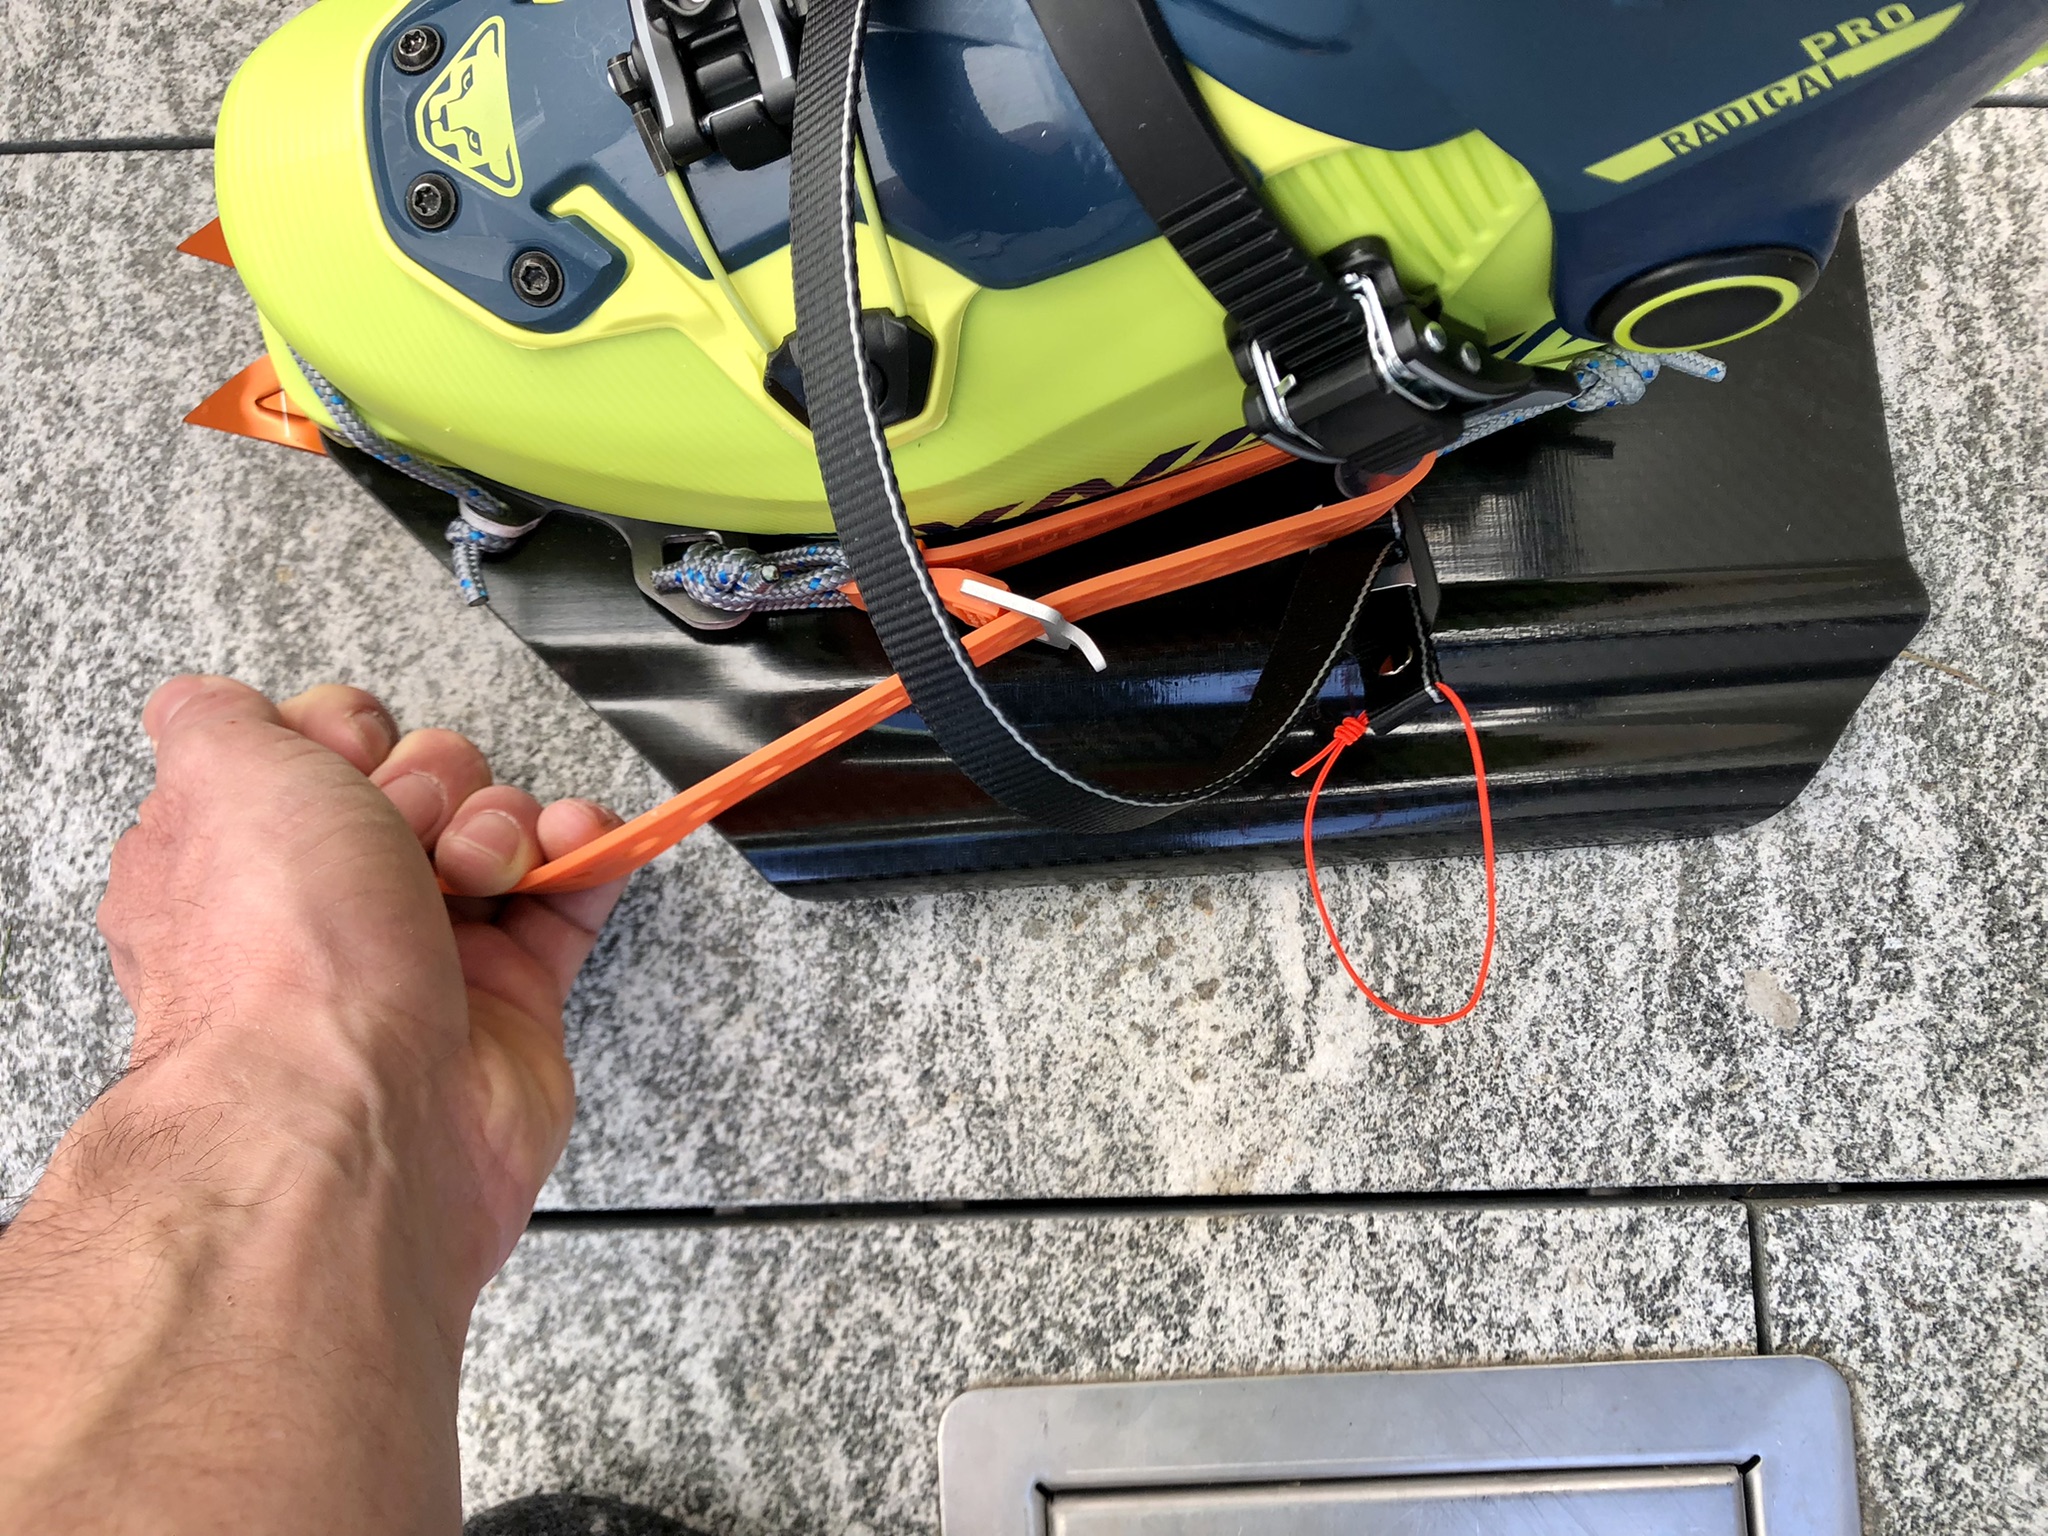 make sure there is no interference between your crampon and the plate (including the cords)!